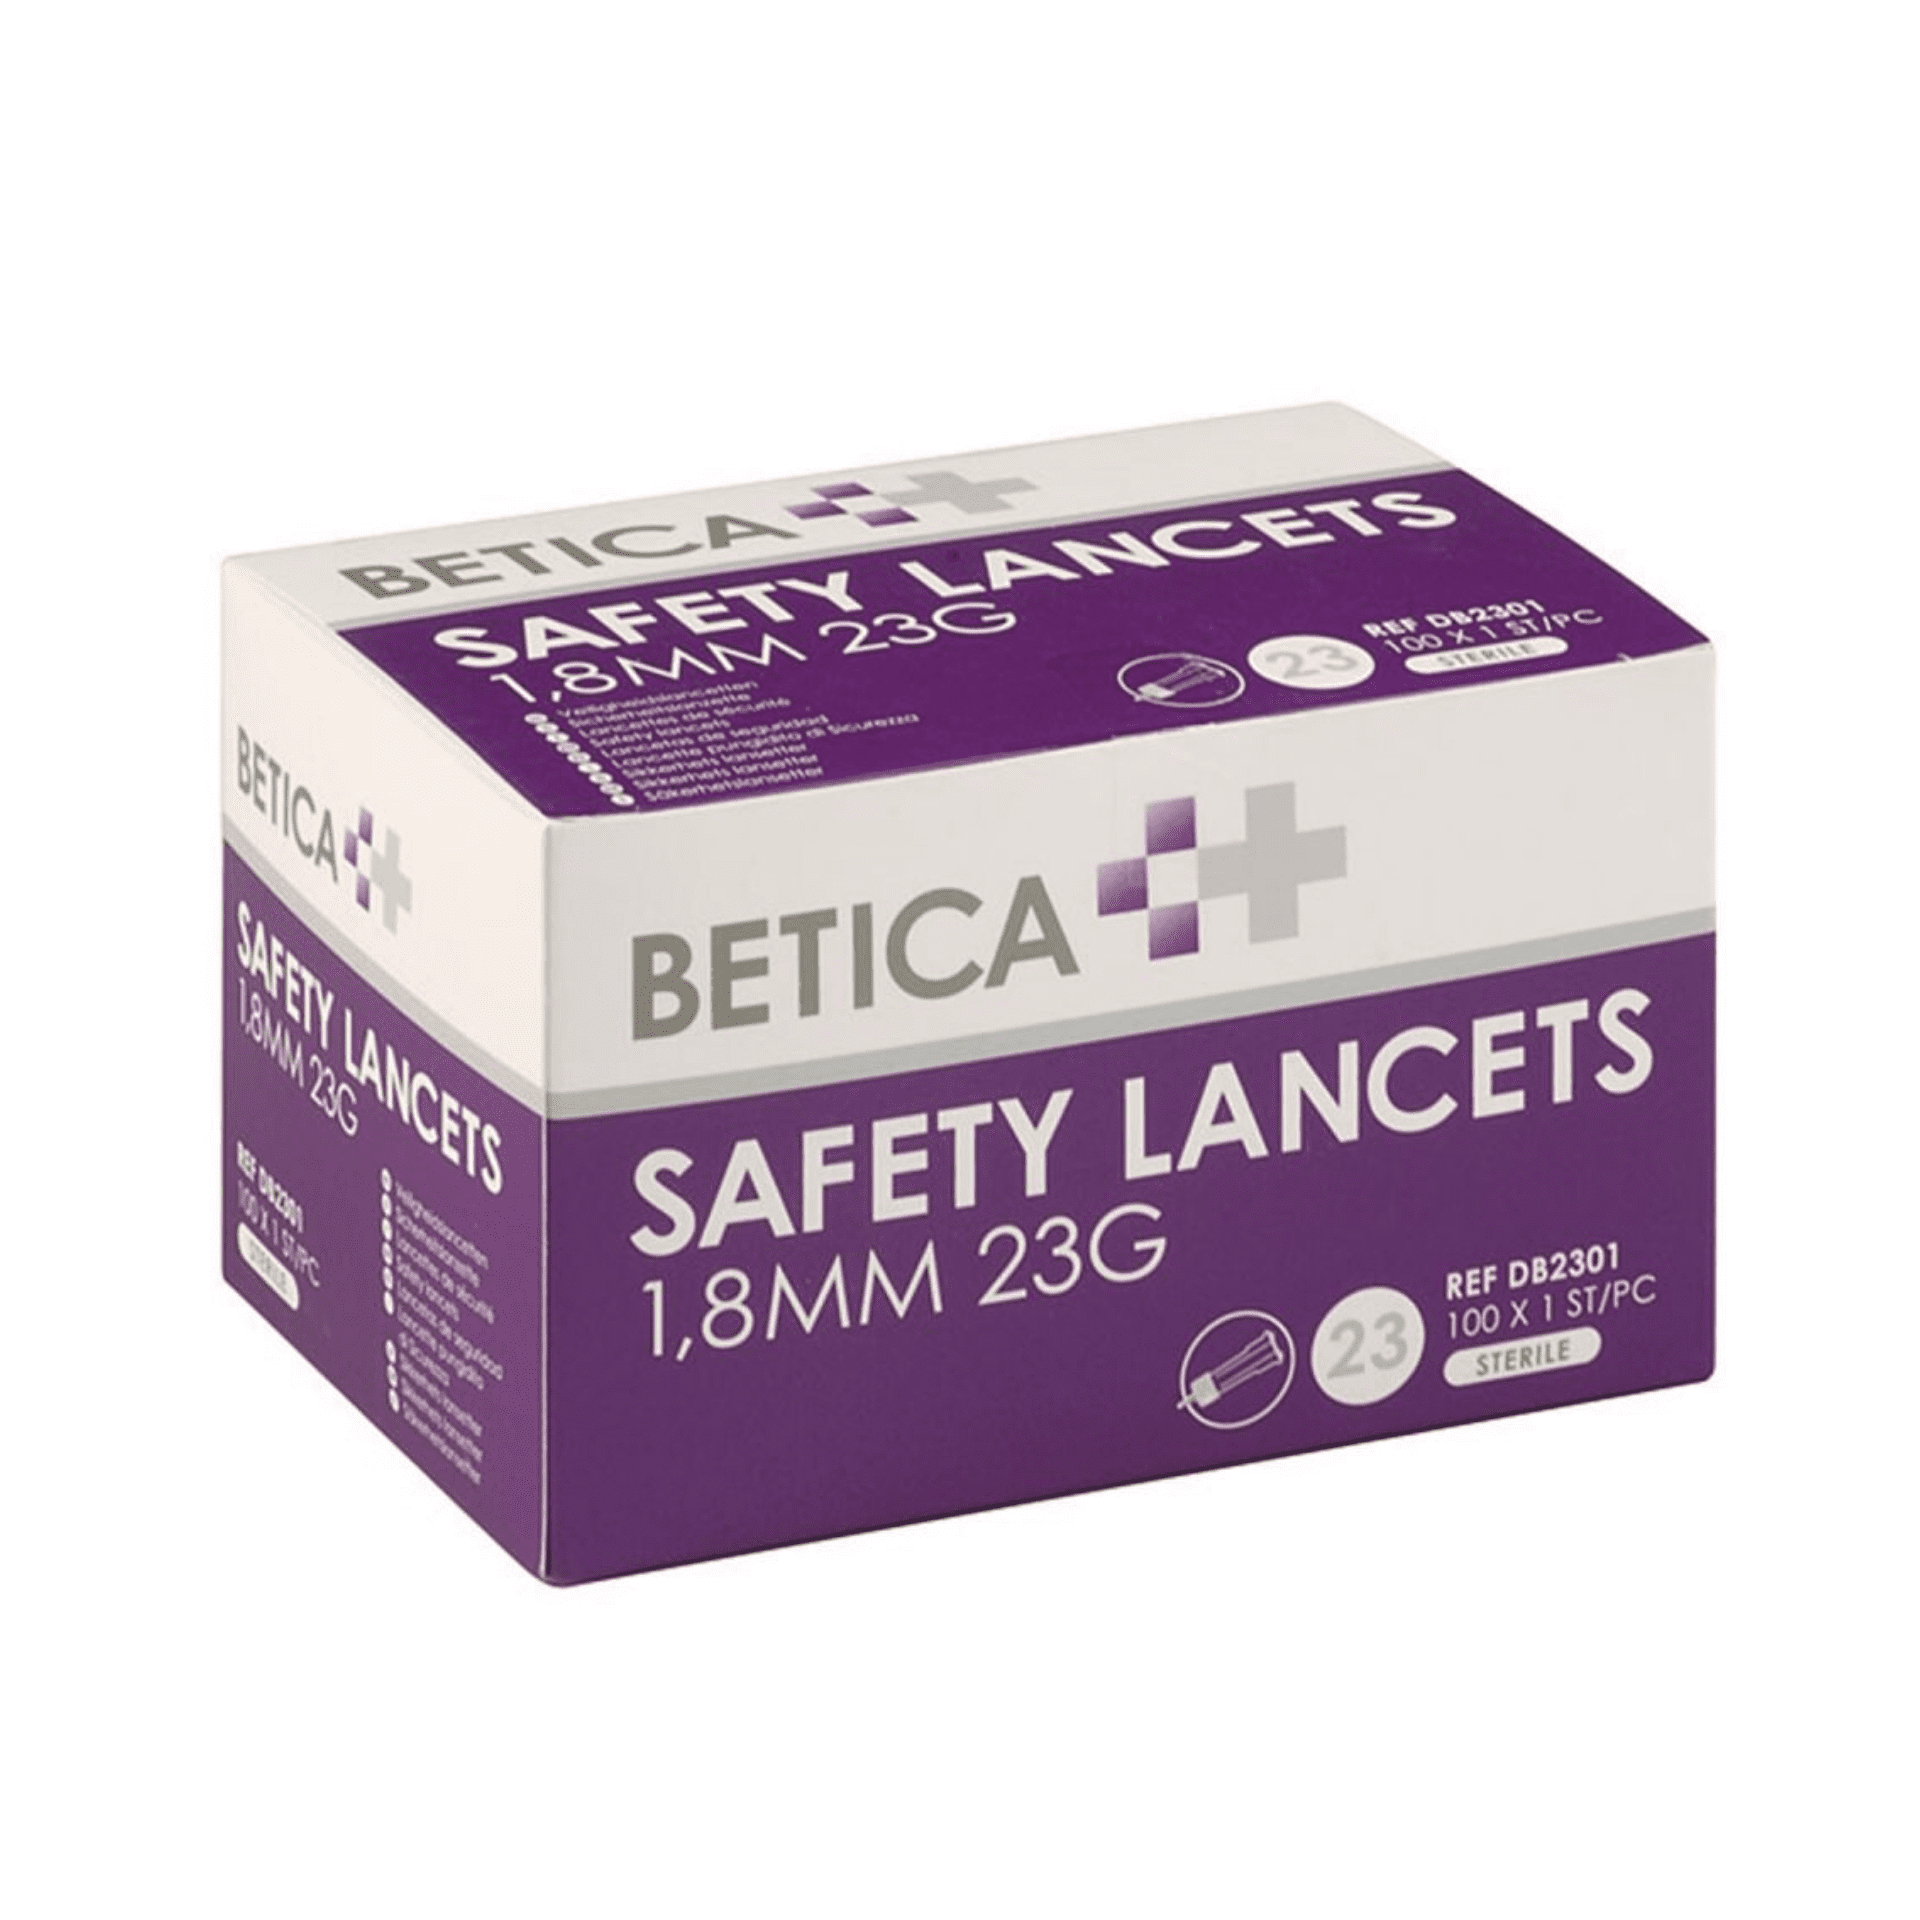 Betica Safety Lancets 1,8 mm 23 g 